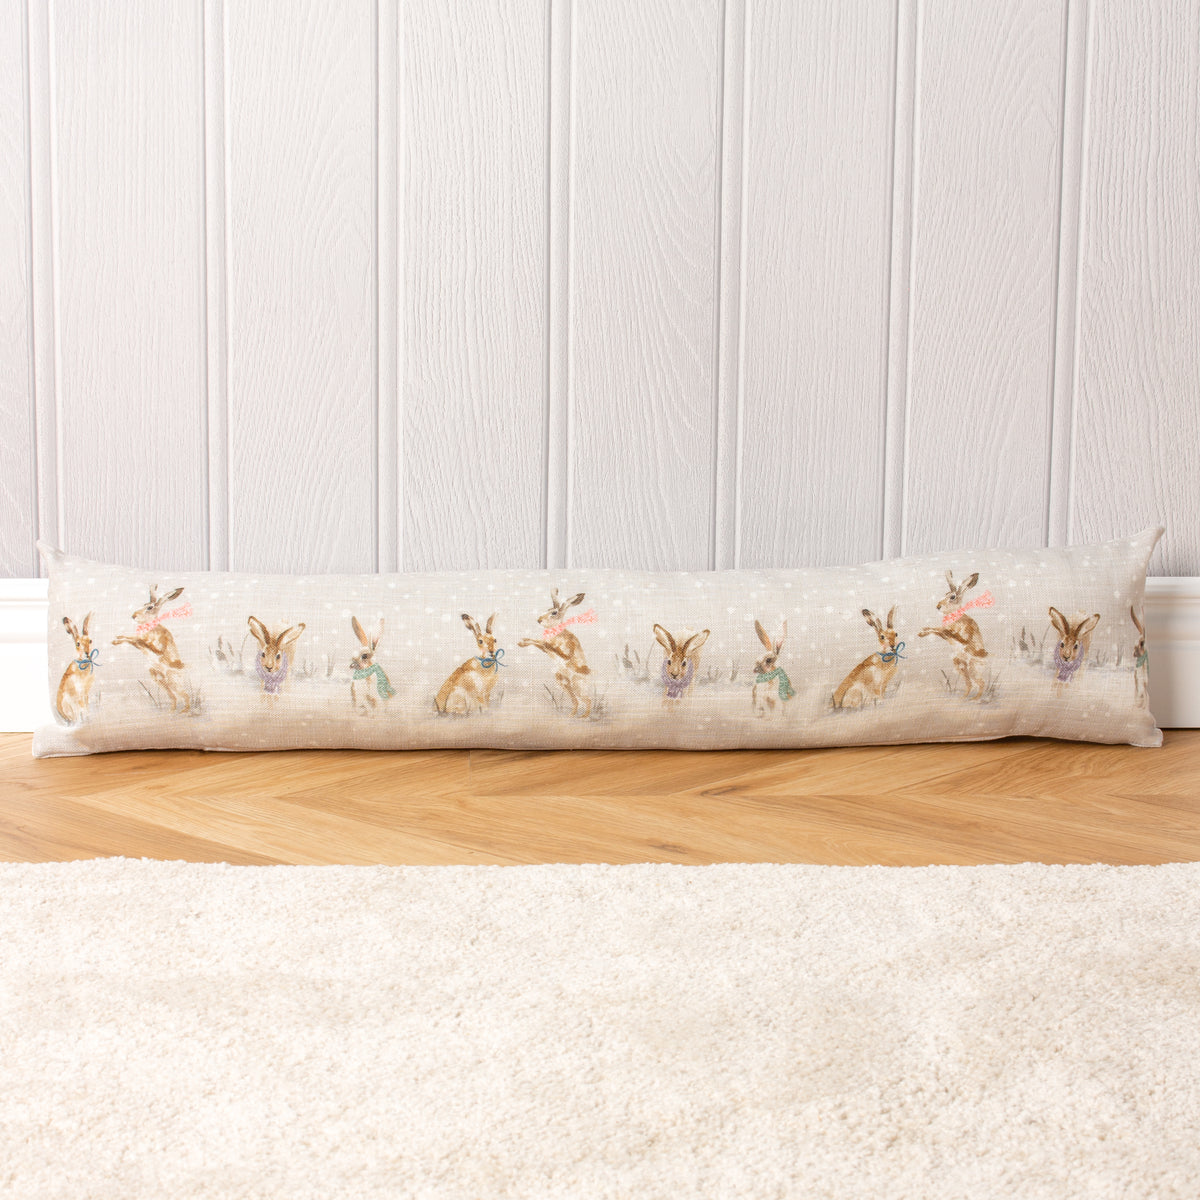 Snowy Hares Draught Excluder by Roseland Furniture